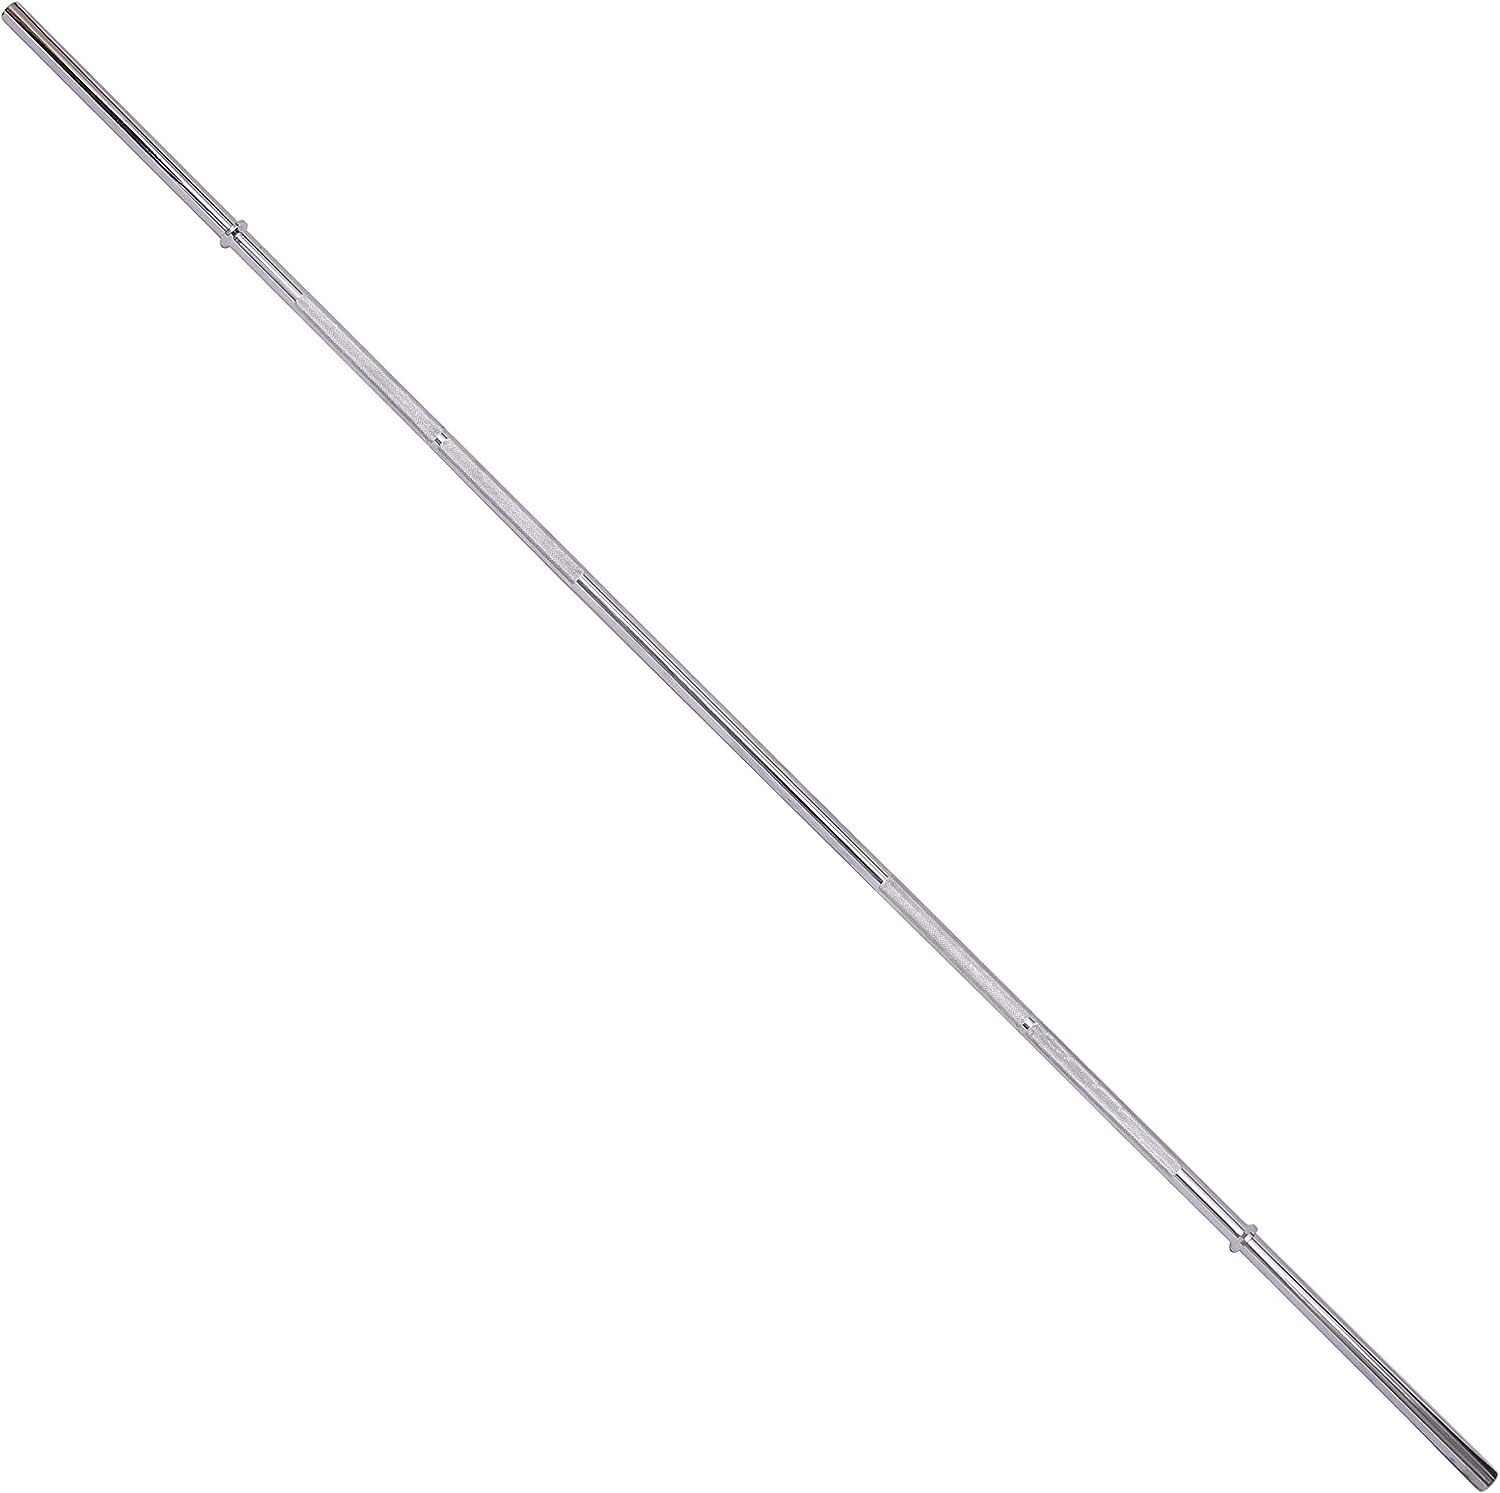 Sporzon! Olympic Barbell Standard Weightlifting Barbell, 1-inch, 7FT, Chrome - $40